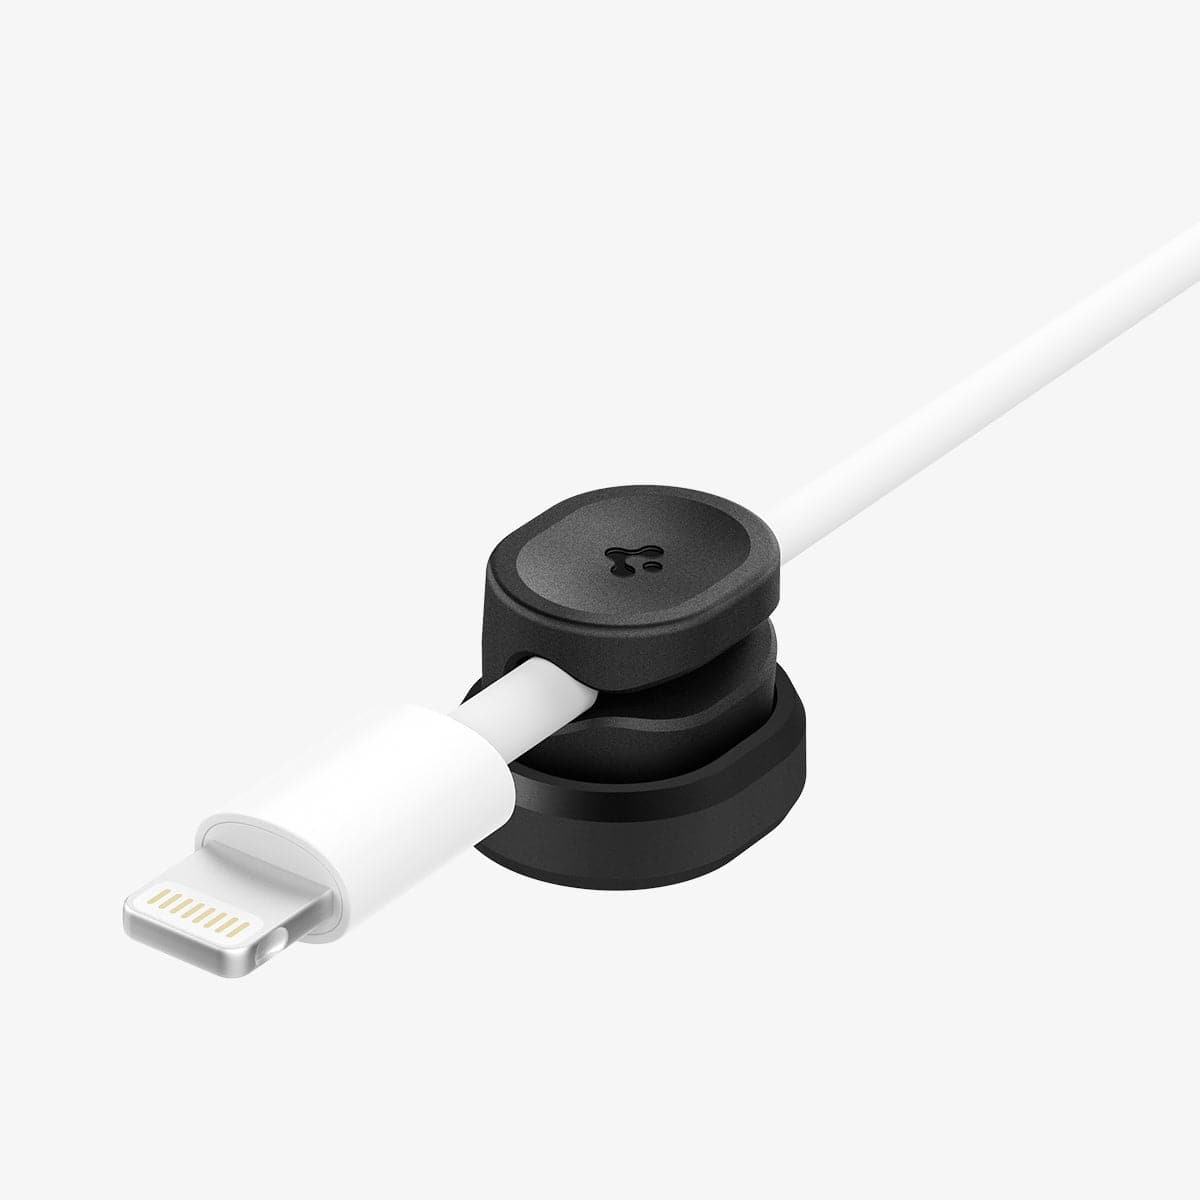 AMP05487 - LD102 Singular Magnetic Cable Organizer in black showing the top and side with cable inserted